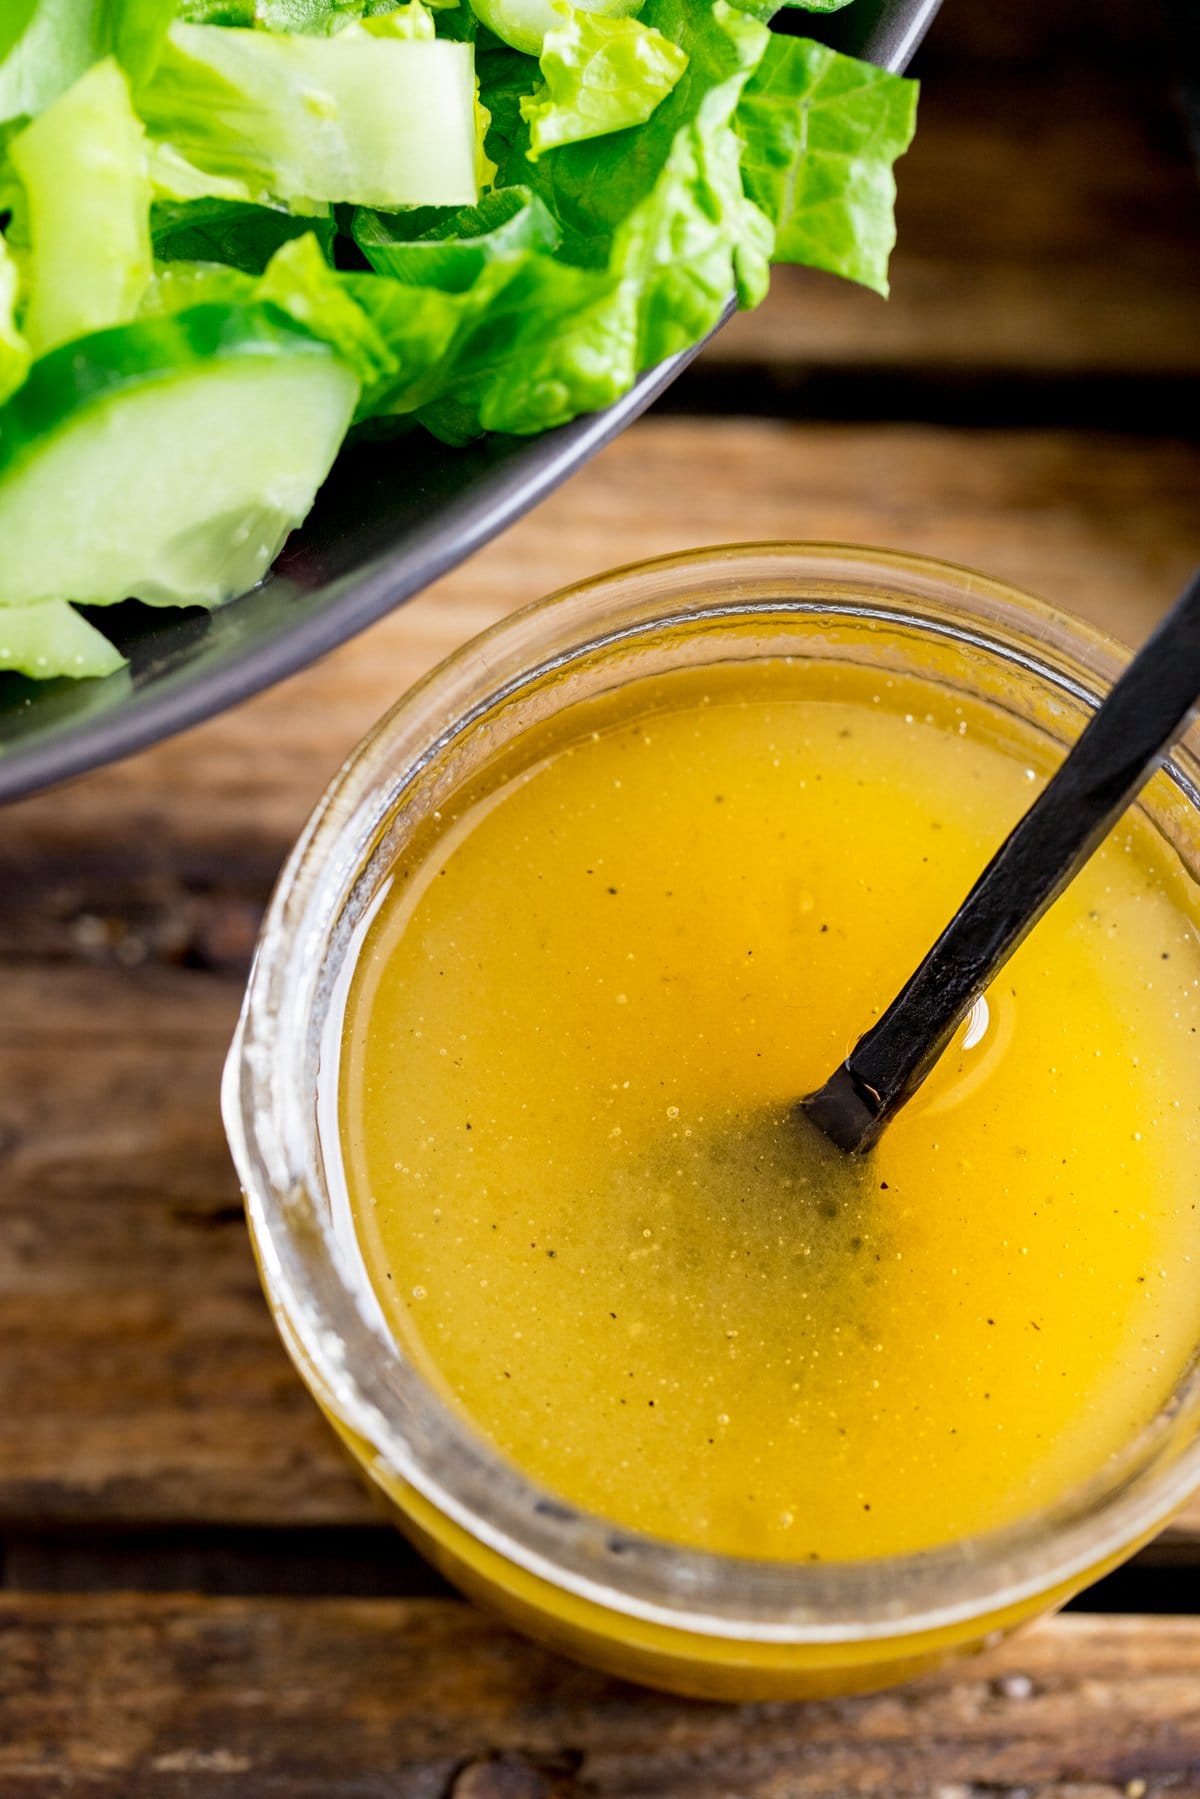 Overhead shot of a jar of honey mustard salad dressing on a wooden table. Bowl of salad partially in shot.